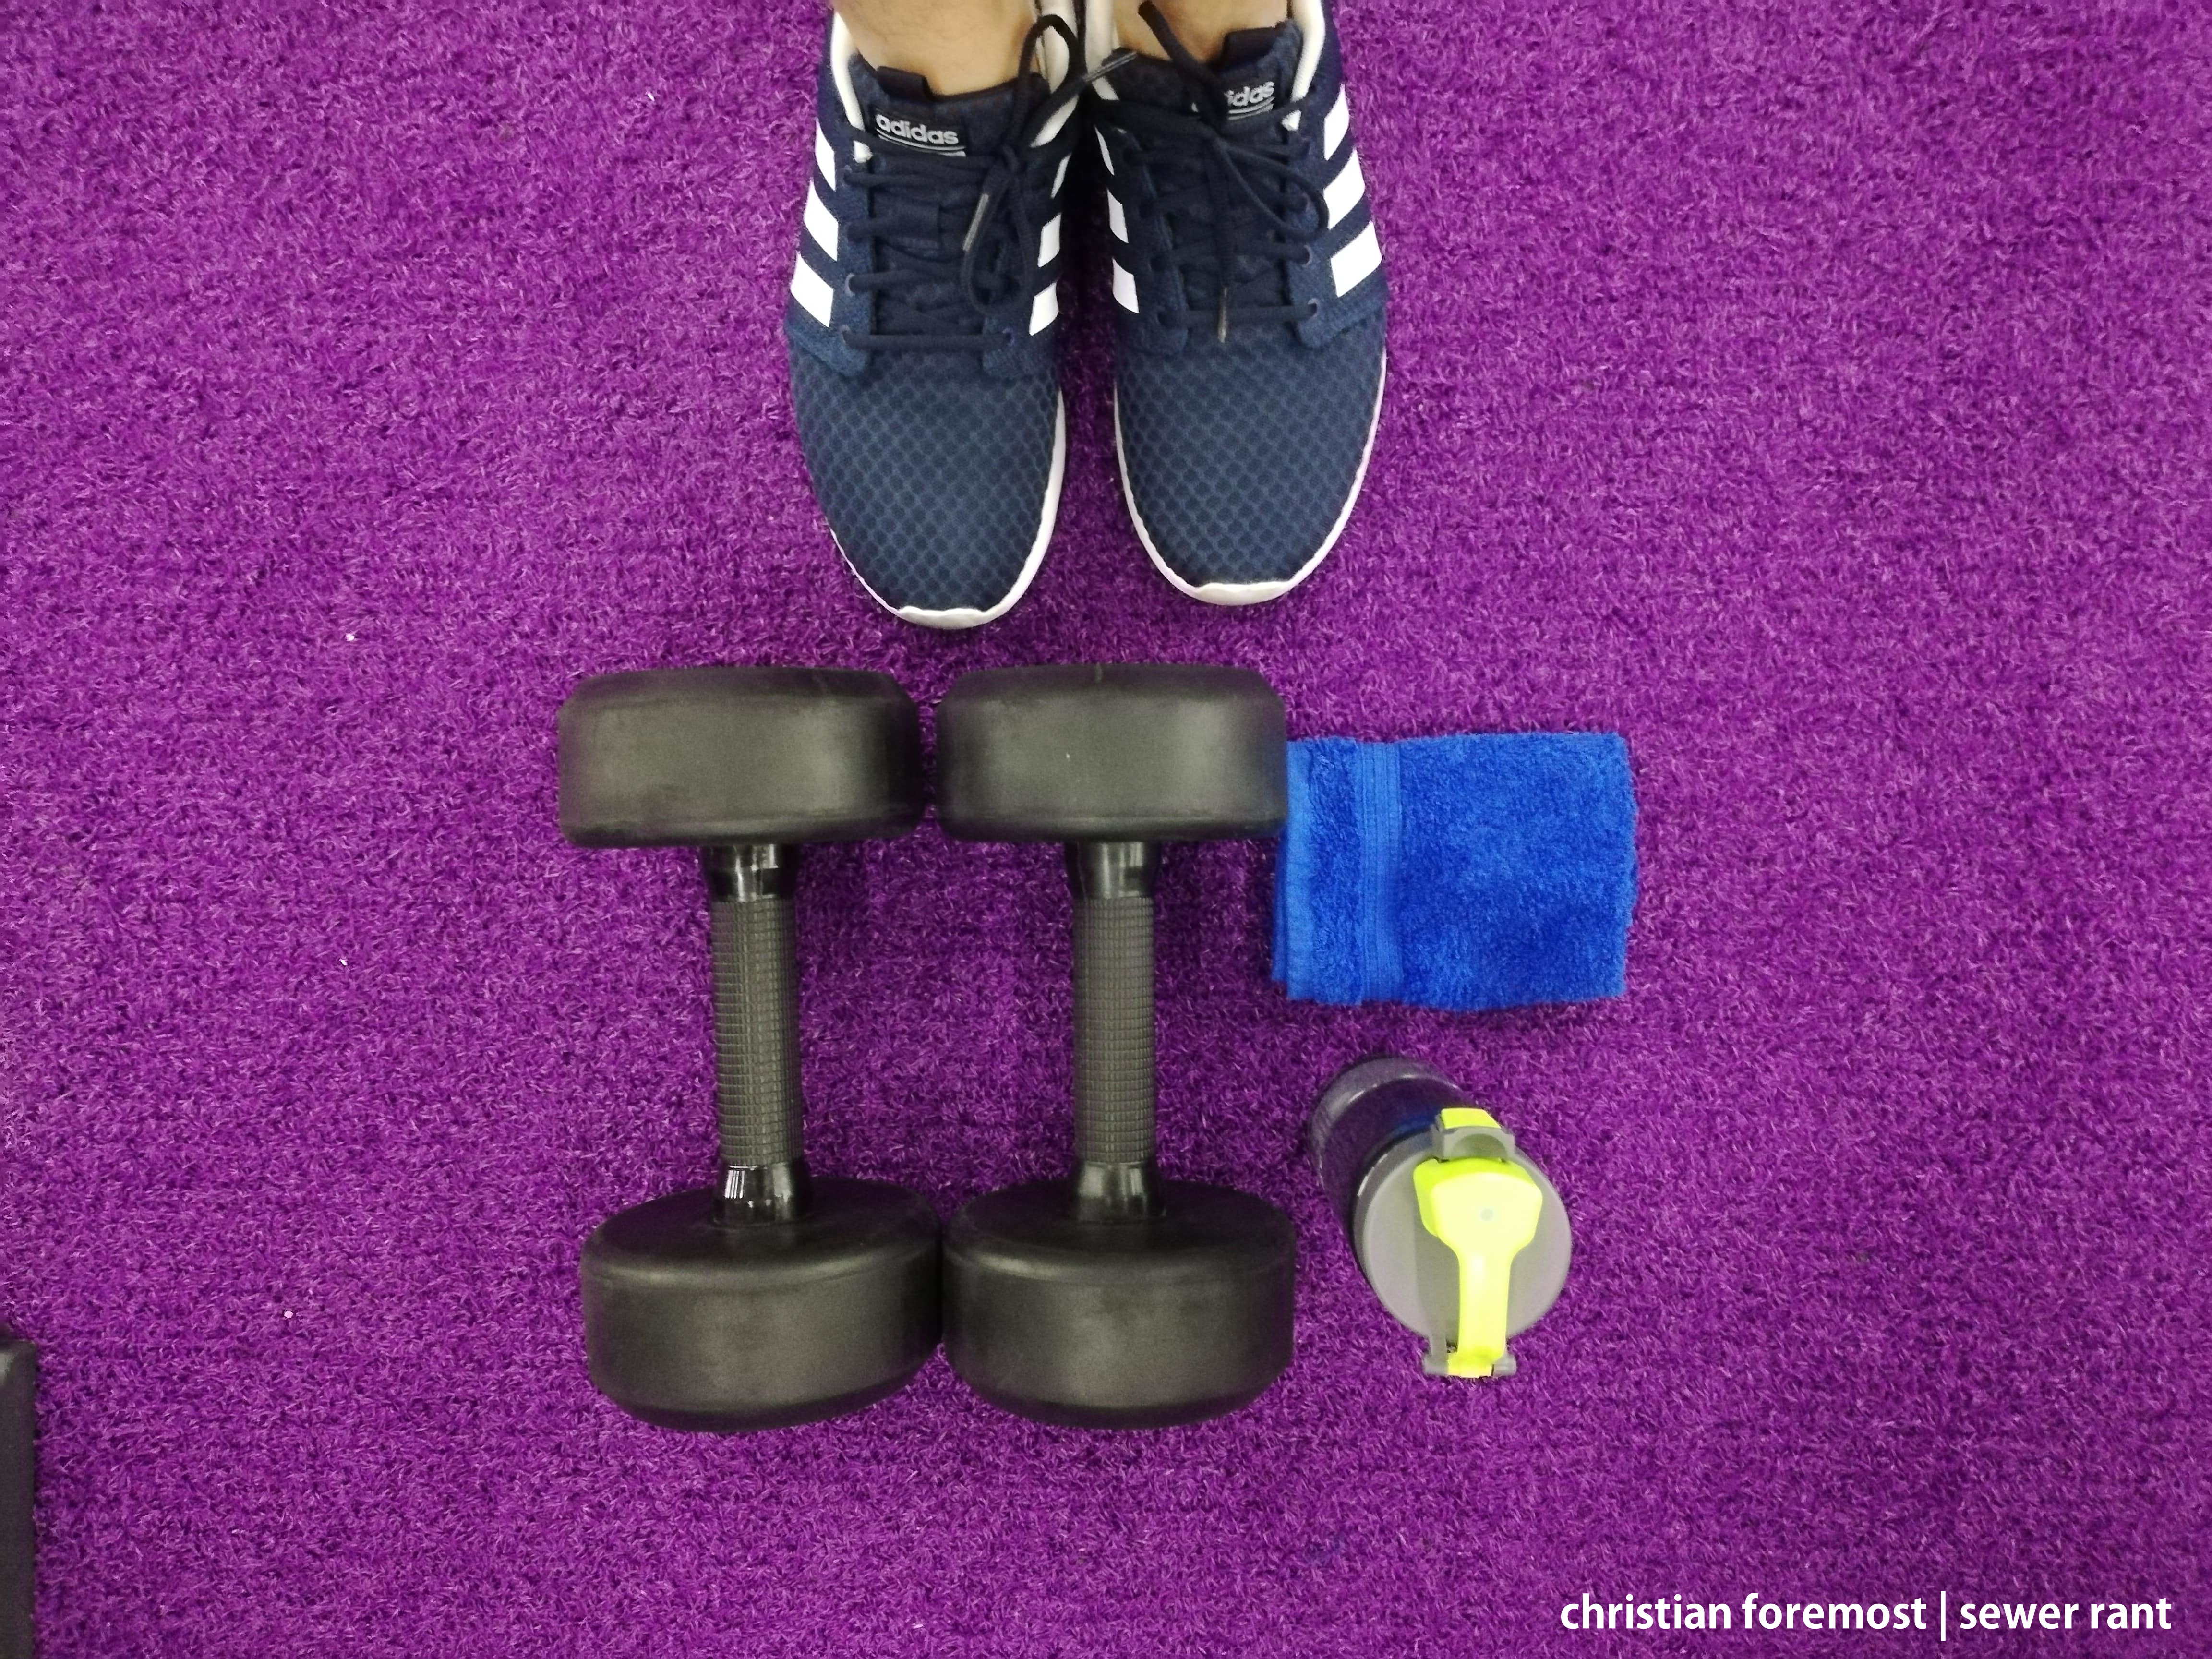 7 Helpful Tips for Gym First Timers